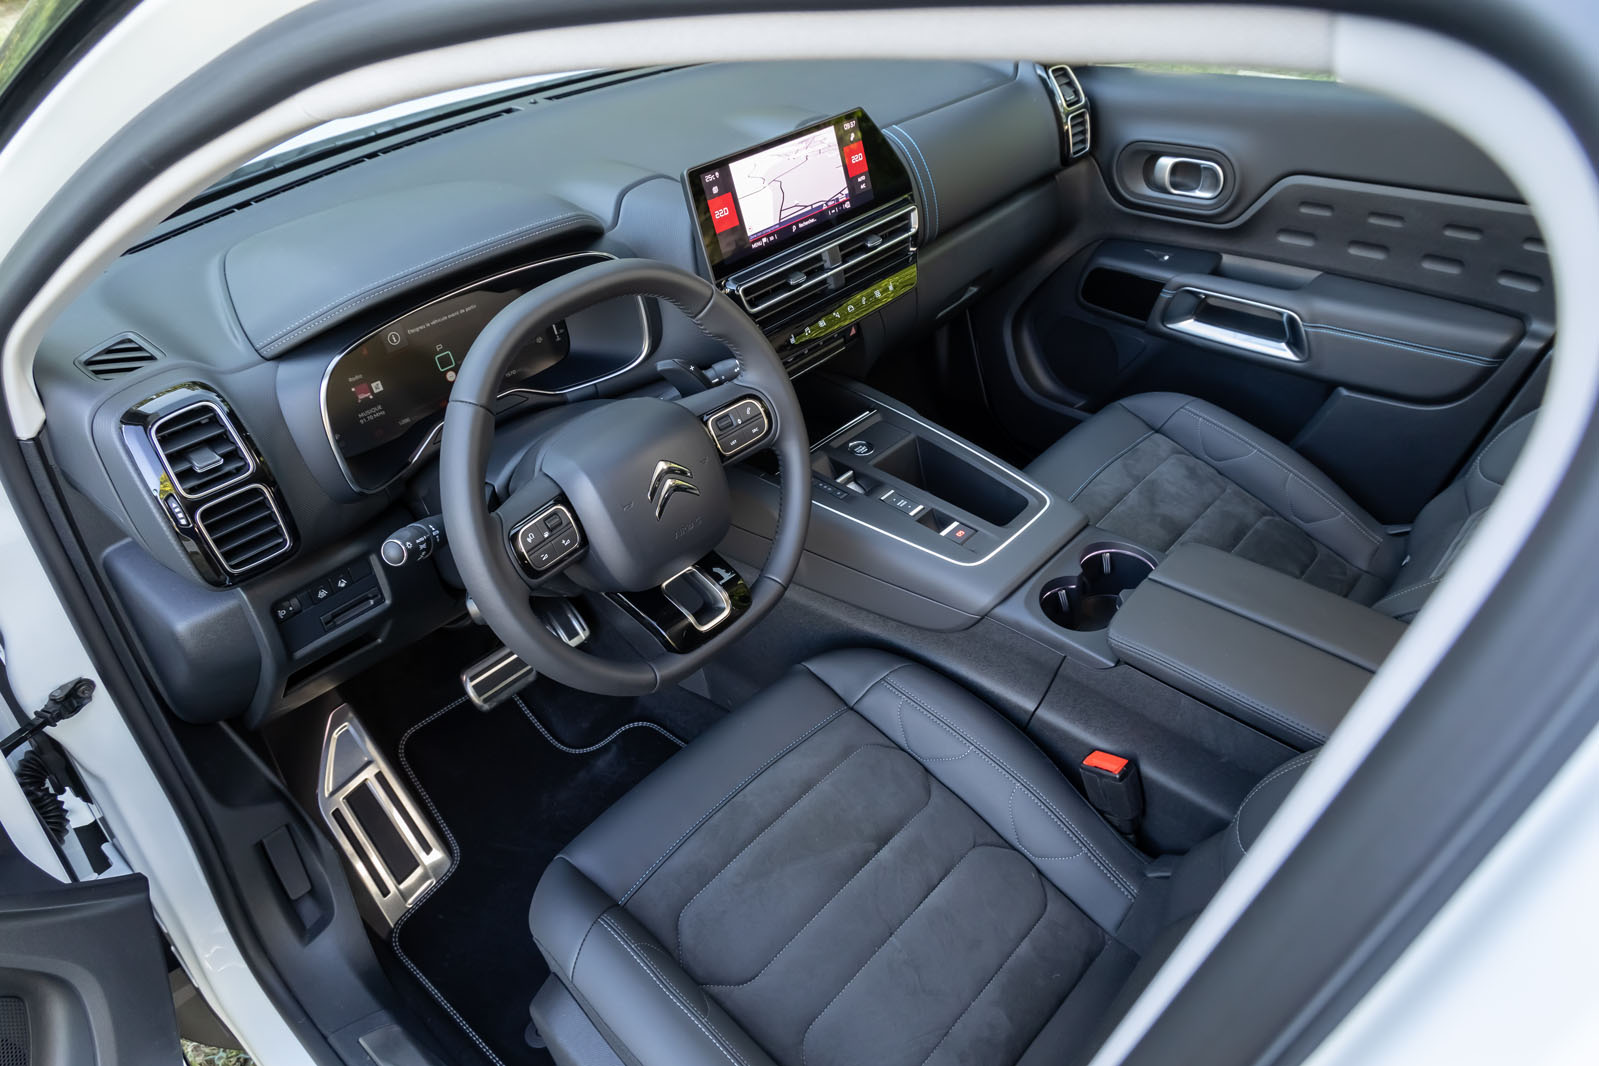 Citroën - With uniquely designed interiors and a digital dashboard, enjoy a  more connected experience than ever before. The Citroën C5 Aircross SUV  stands out with a perfect combination of comfort and